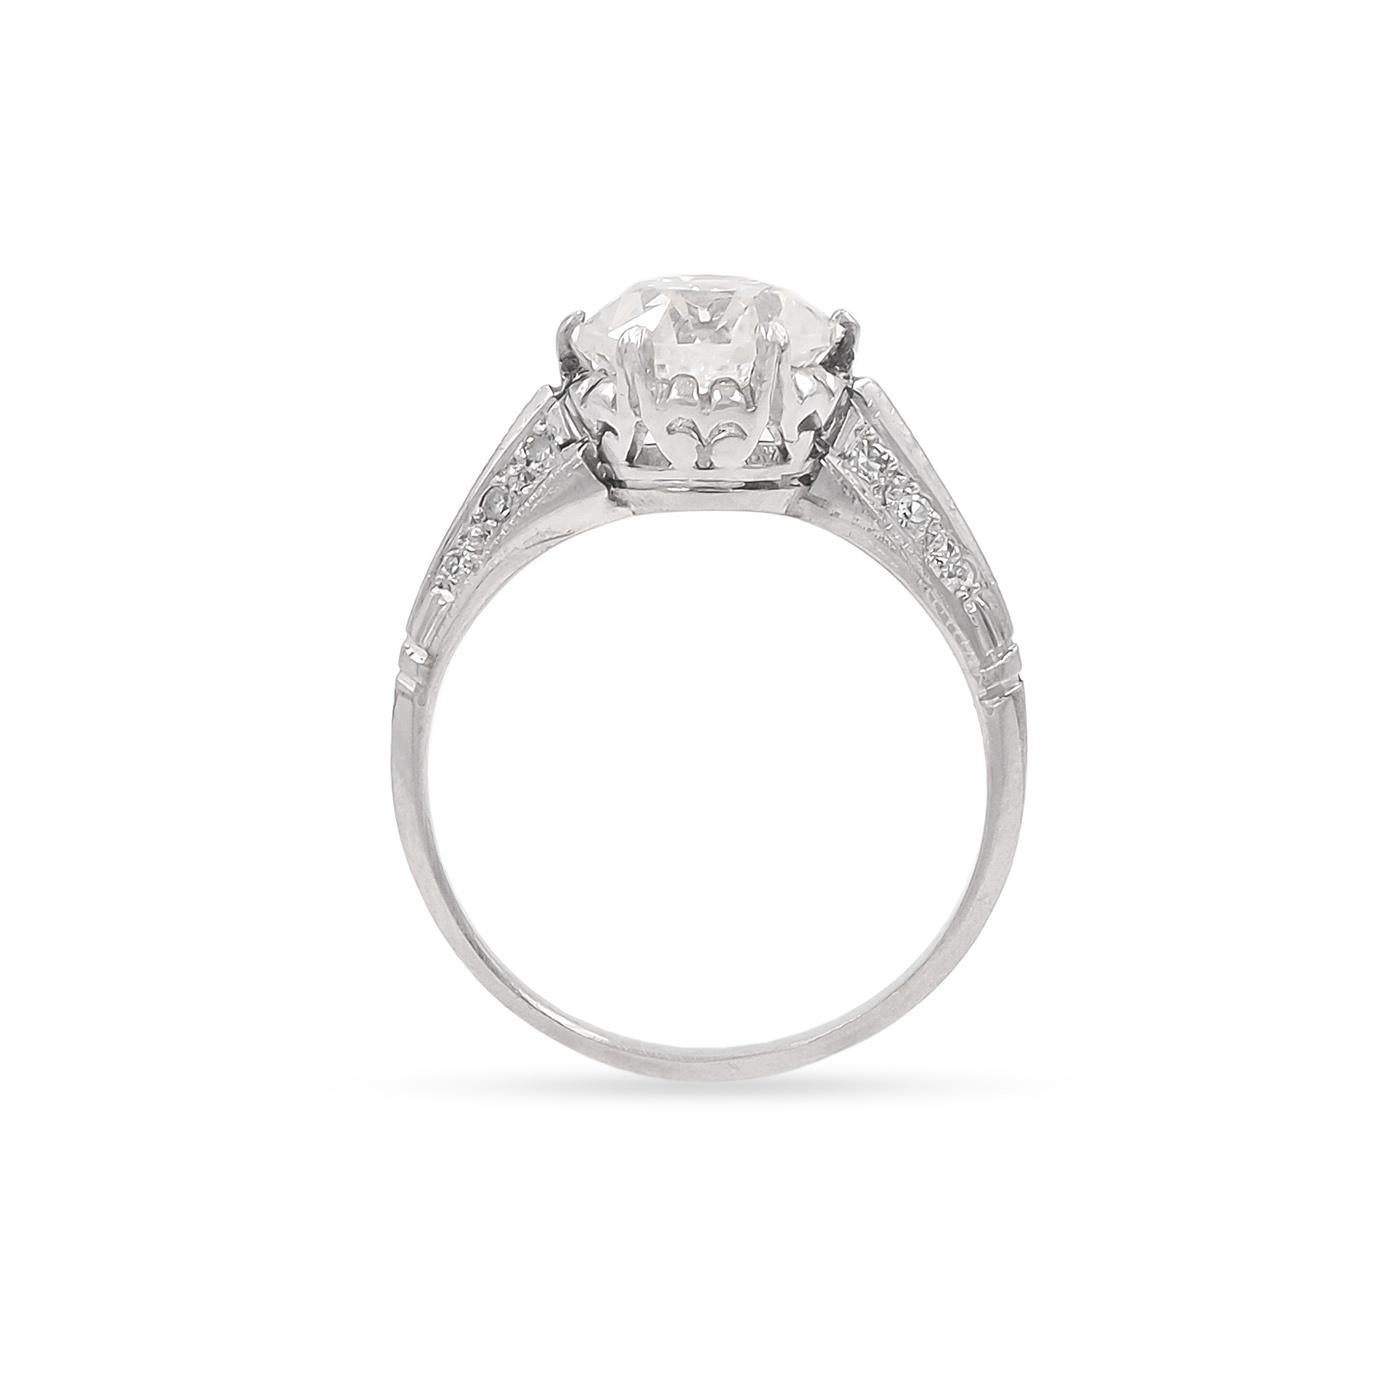 Edwardian French Belle Epoque 2.00 Carat Gia Old European Cut Diamond Engagement Ring For Sale